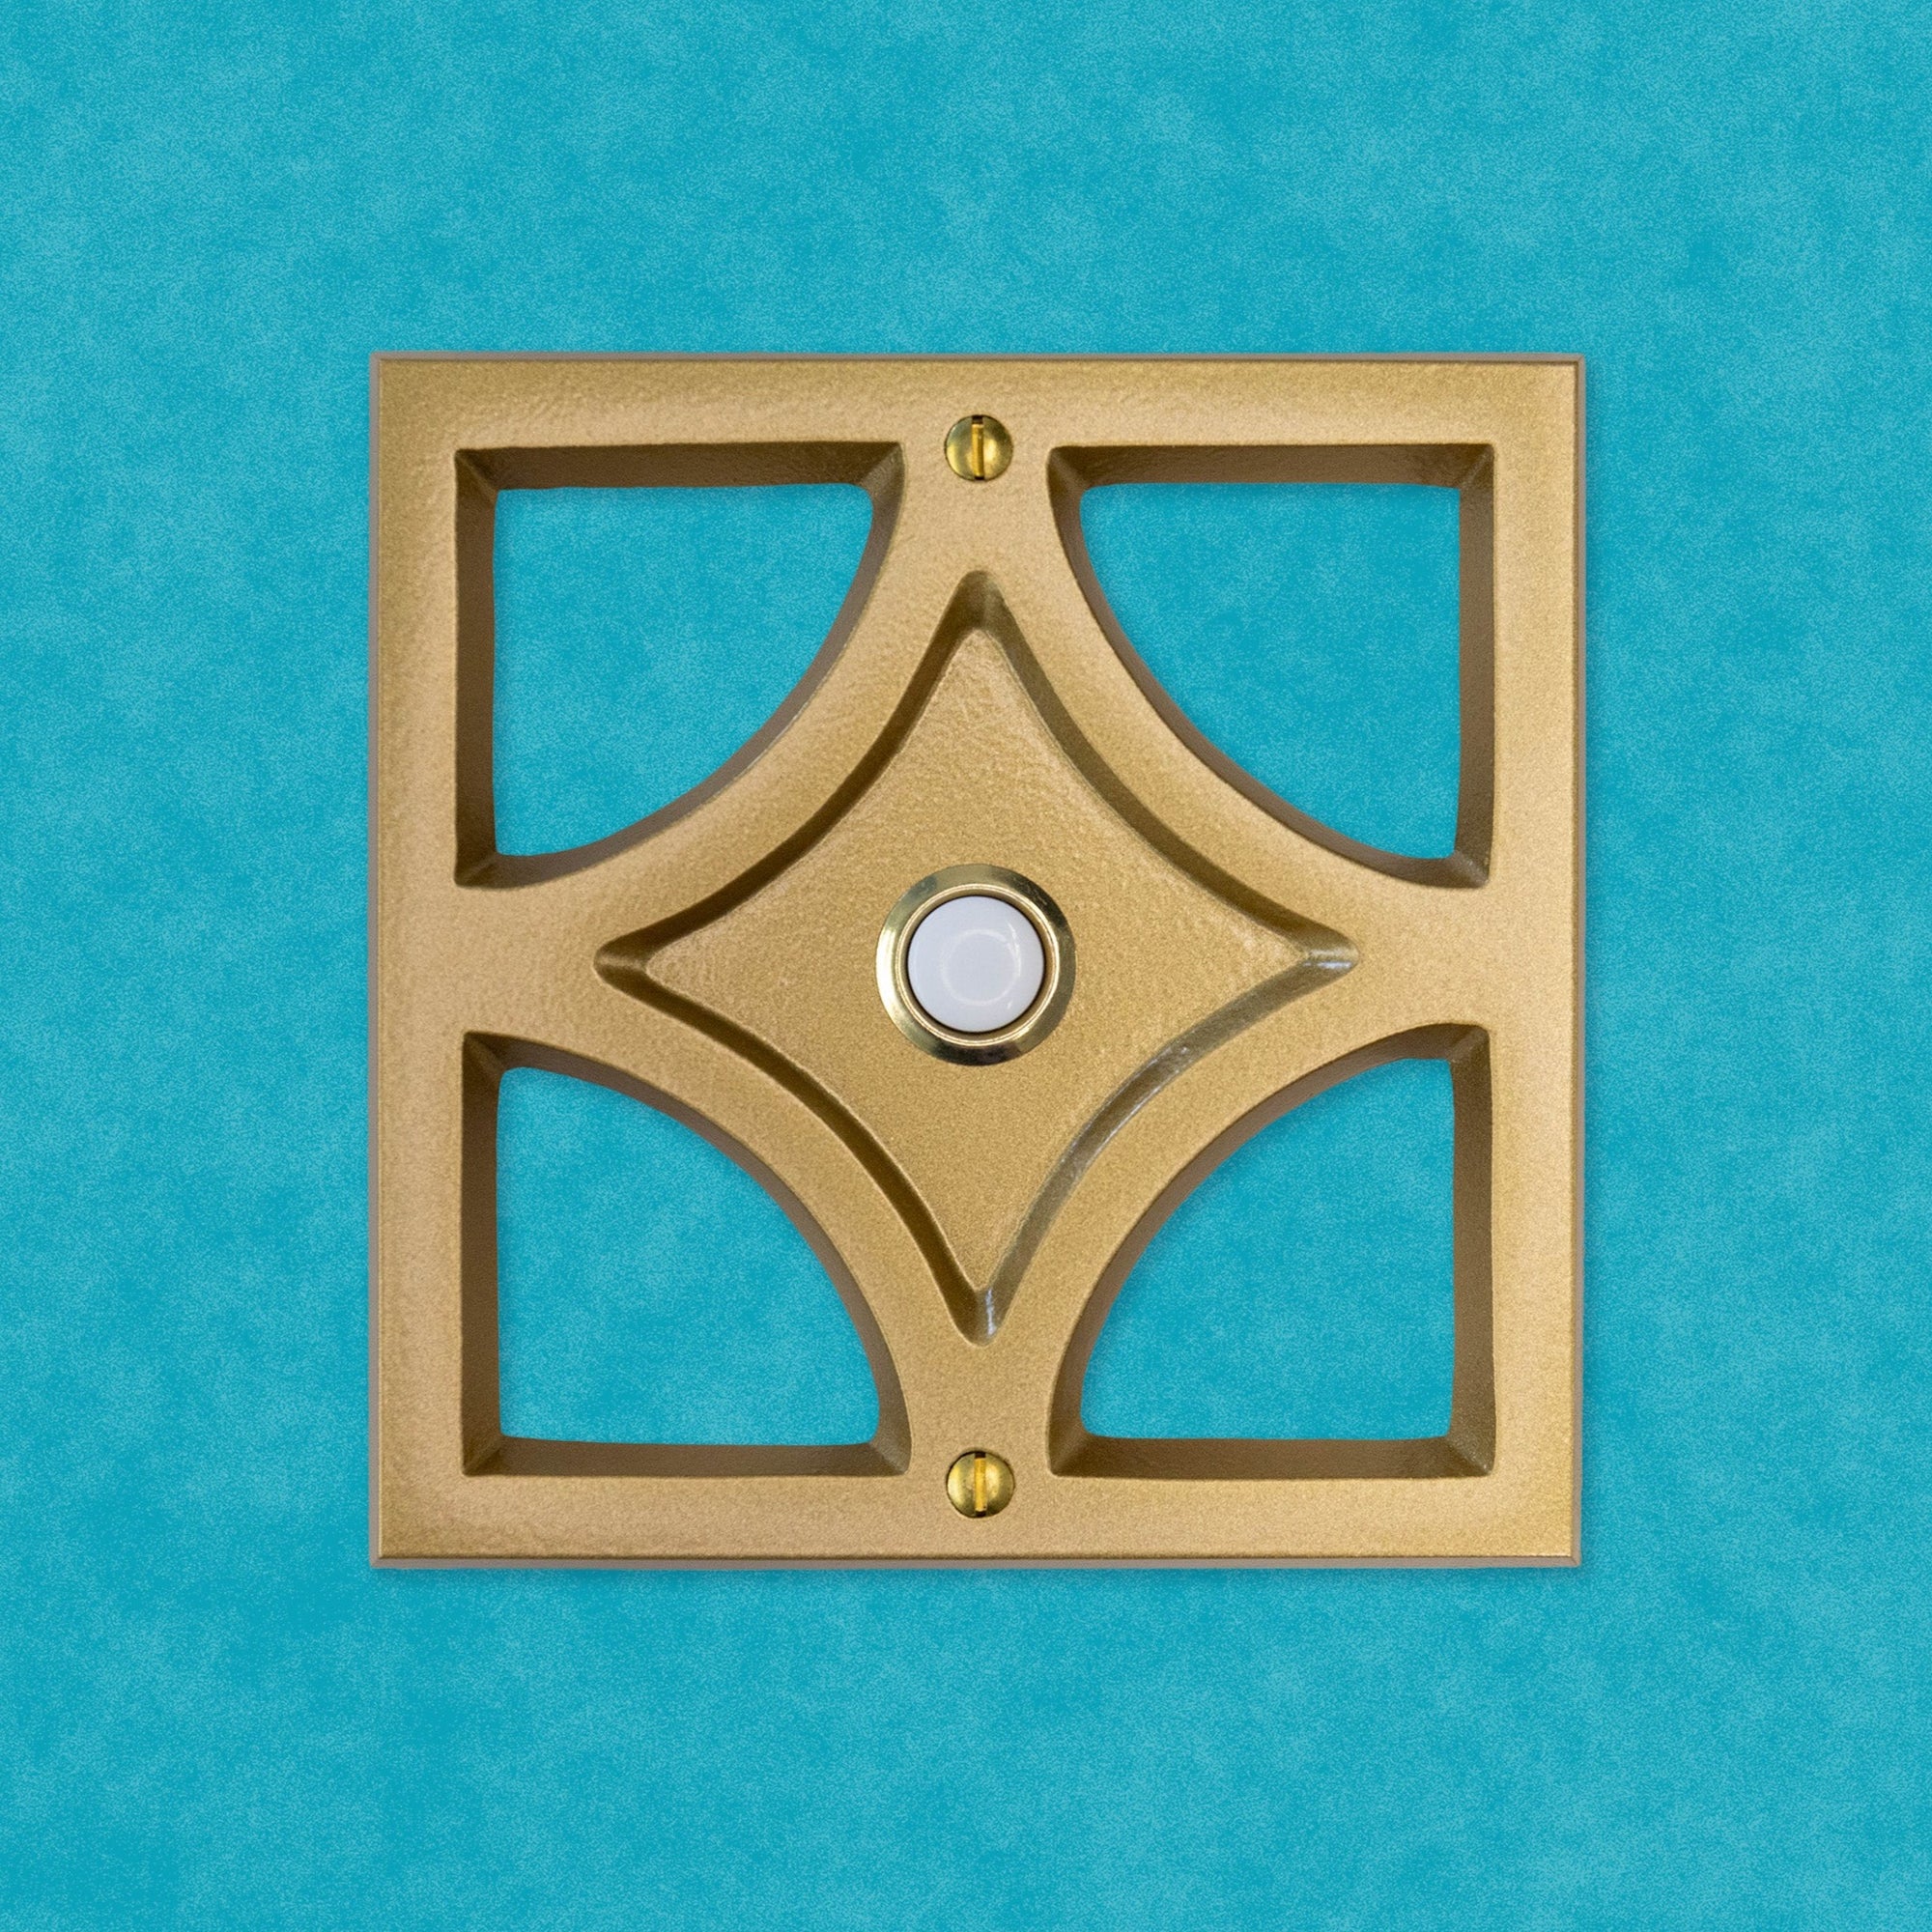 A gold powder coated cast aluminum breeze block with a gold rimmed door bell button and screws. The breeze block design is a square exterior with a diamond shape inside, leaving 4 hollow corners. The middle of the diamond is sunken in, and that is where the doorbell button is. There are two gold screws, one at the top and bottom of the square. The gold powder coating is smooth in texture and has a bit of reflective shine to it